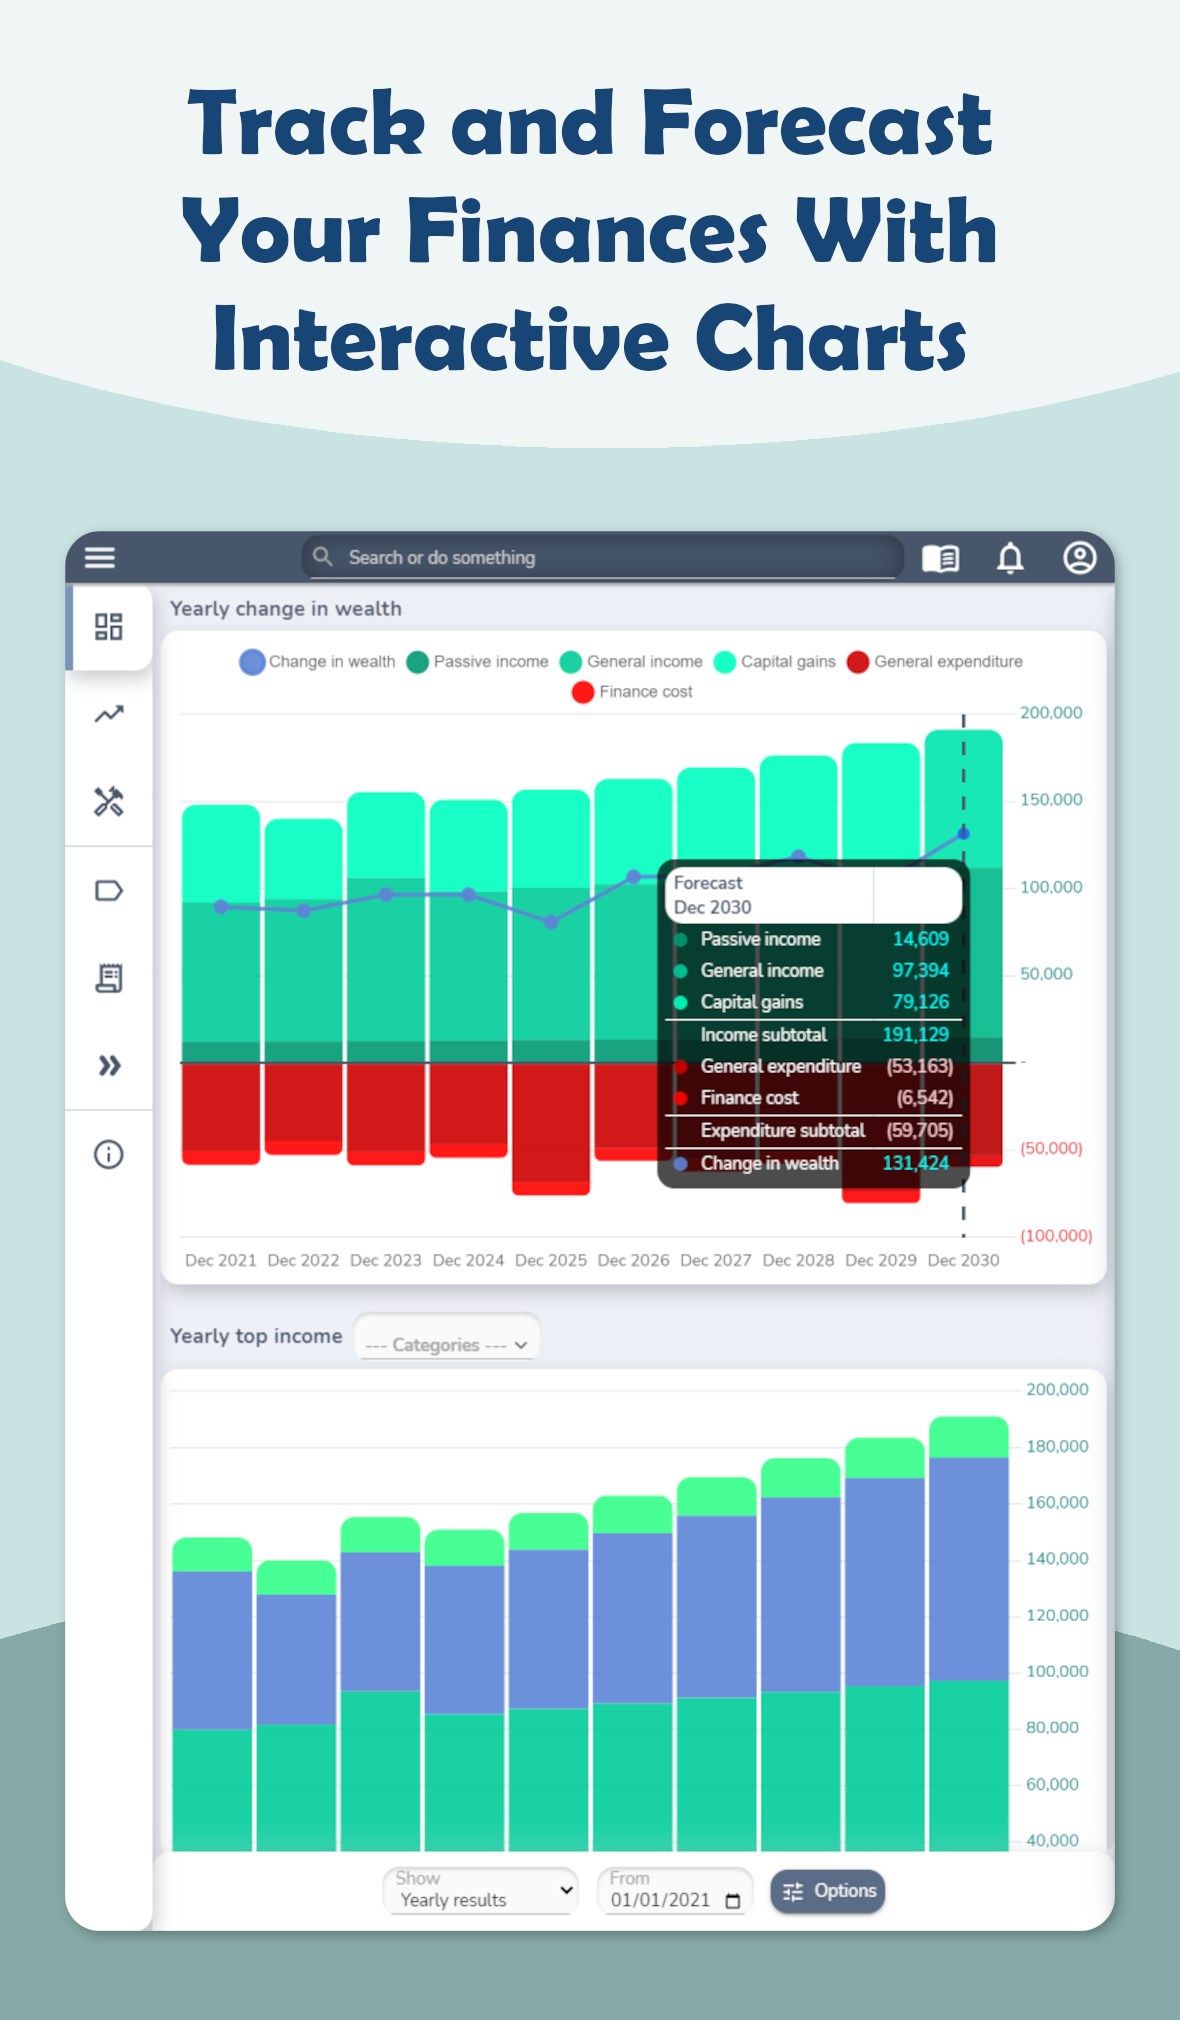 Track and forecast your finances with interactive charts